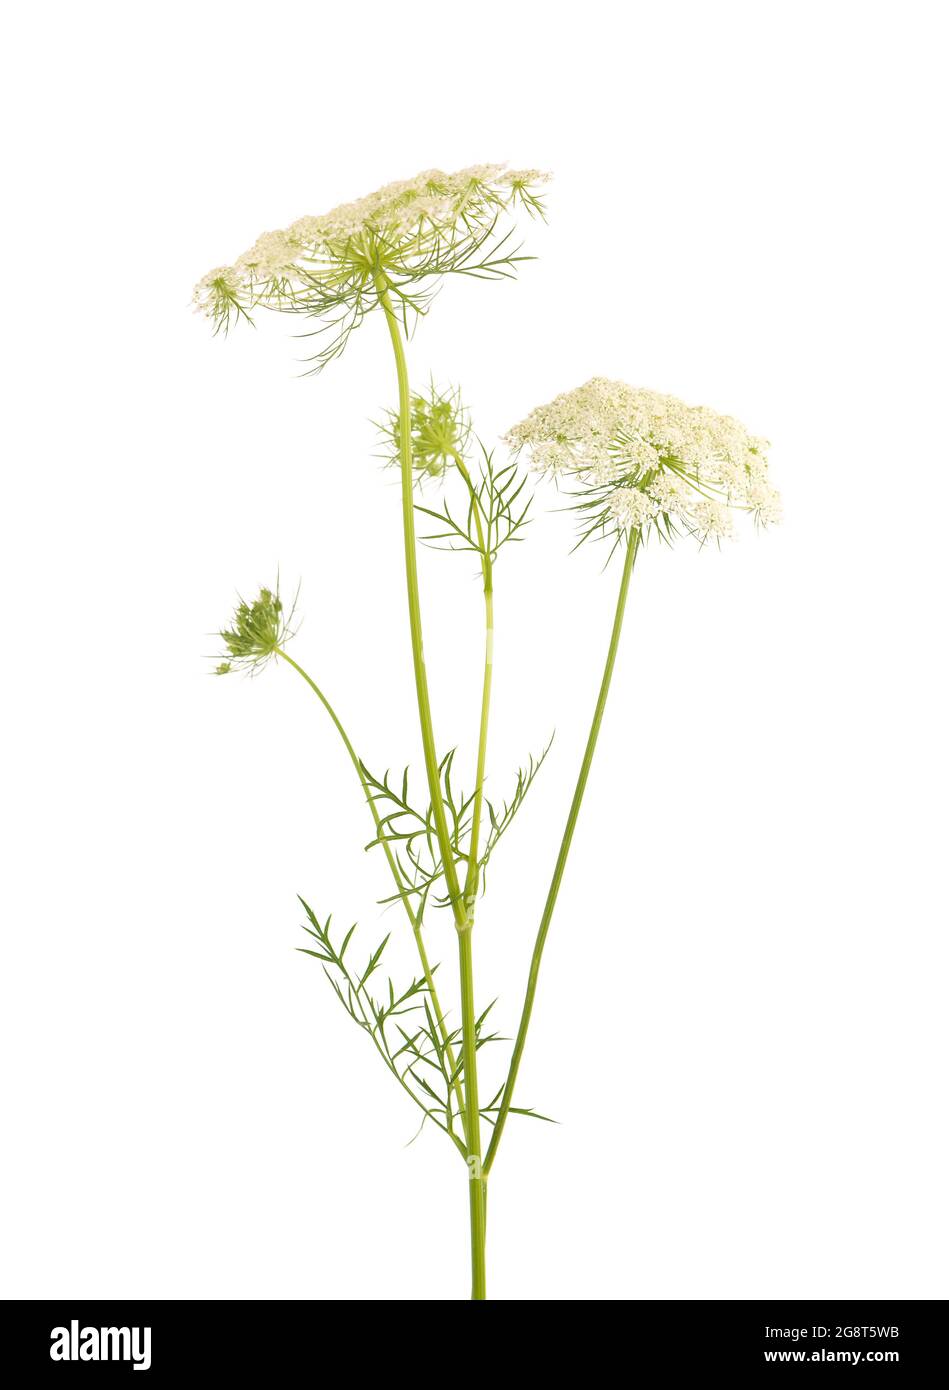 Wild carrot or Daucus carota, flowers isolated on white background. Medicinal herbal plant. Stock Photo